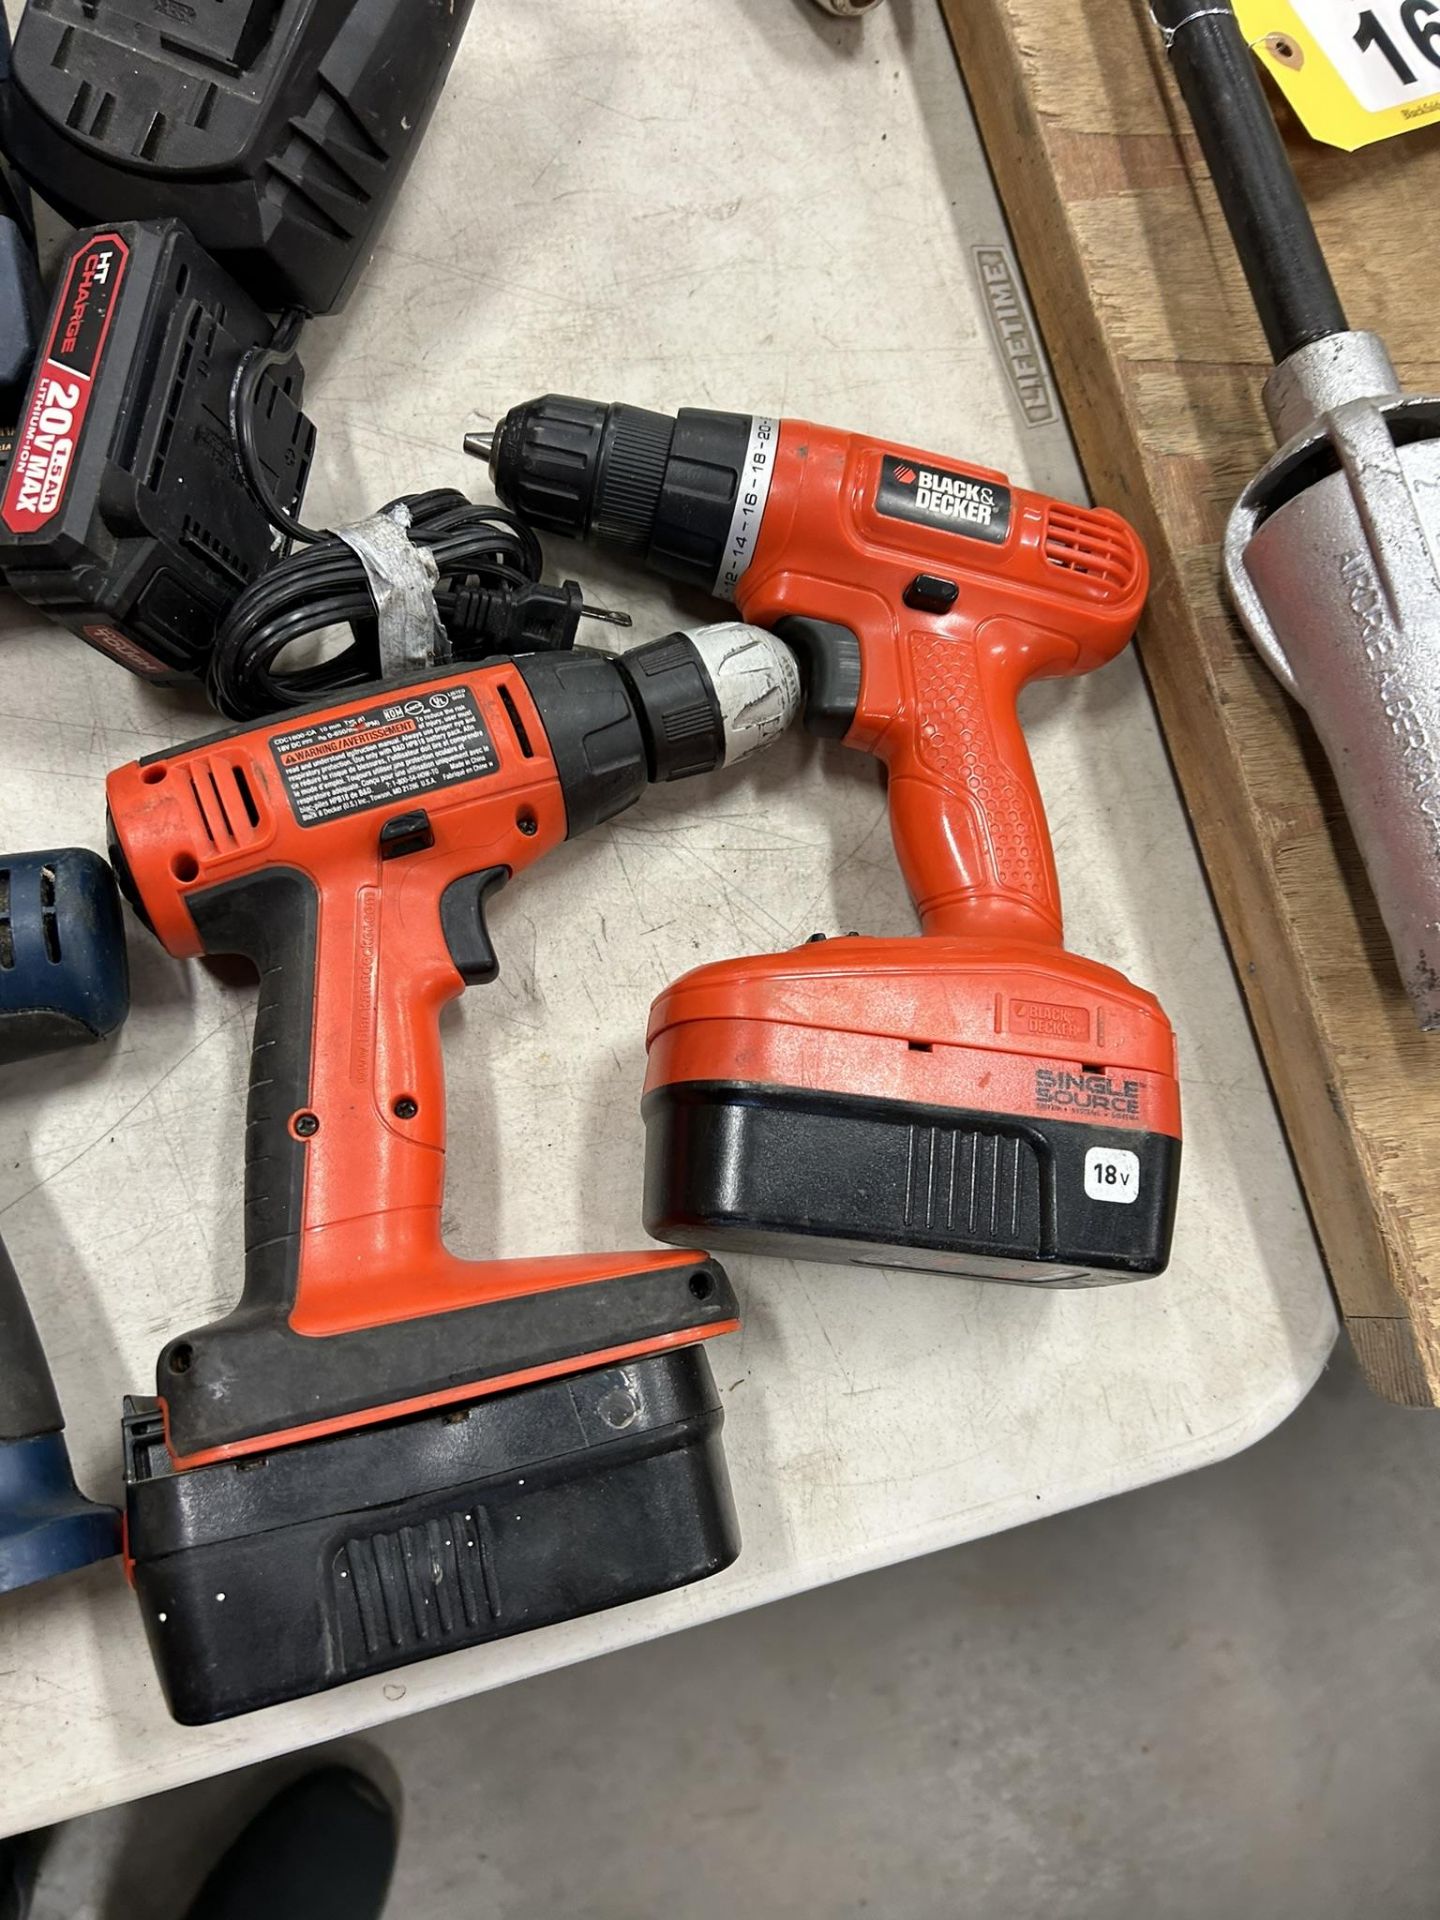 L/O ASSORTED CORDLESS POWER TOOLS, ETC. - Image 3 of 15